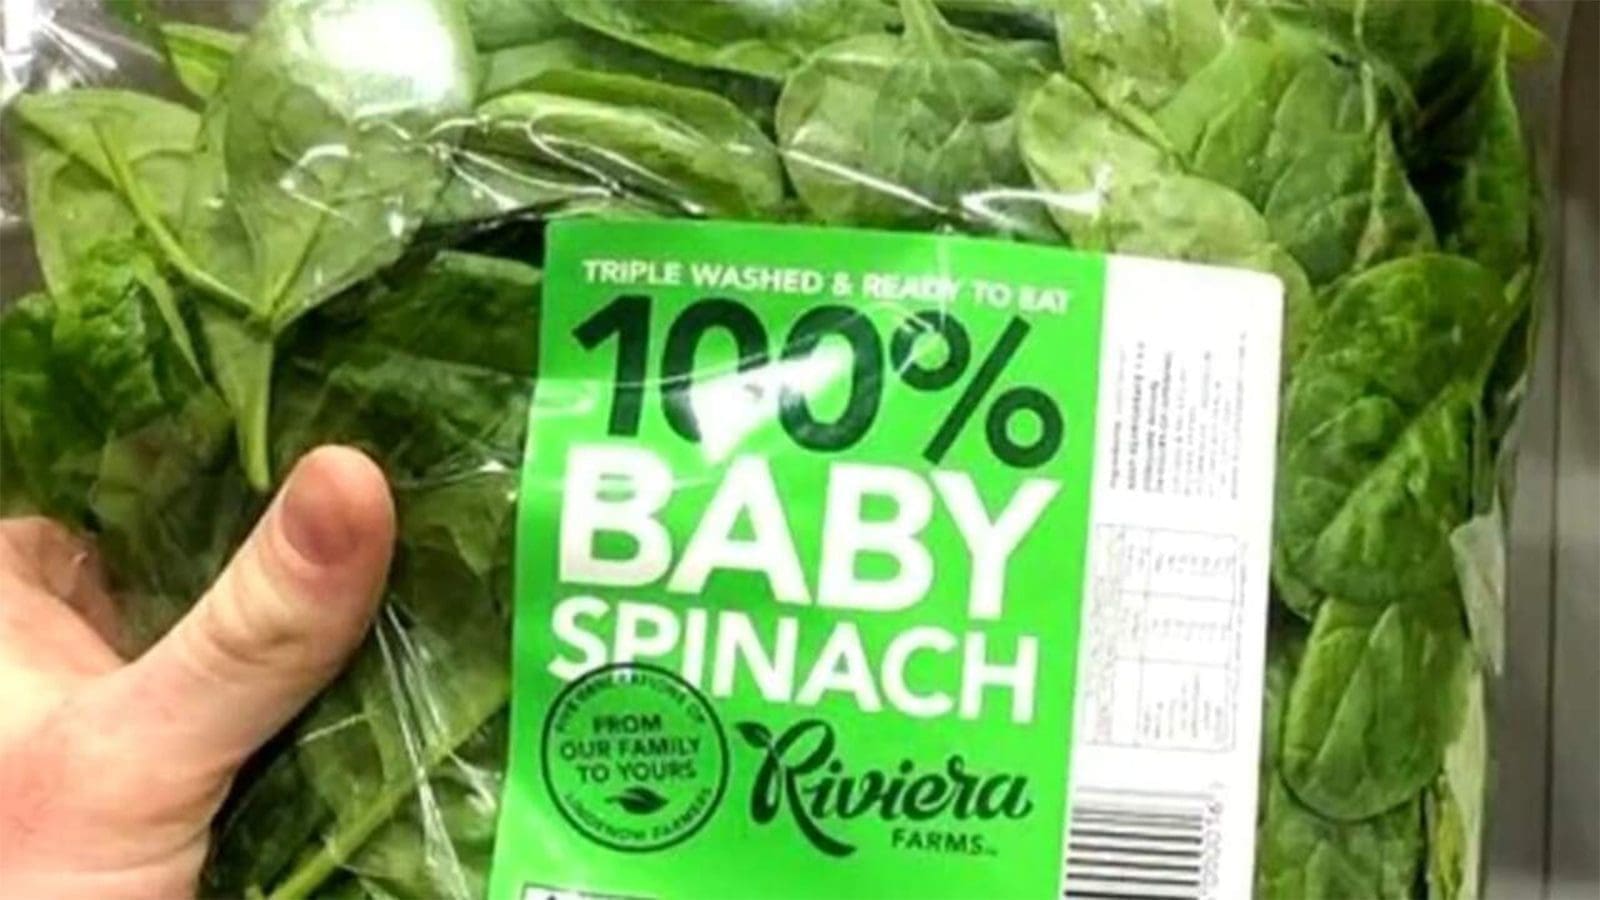 Contaminated baby spinach elicits health scare in Australia